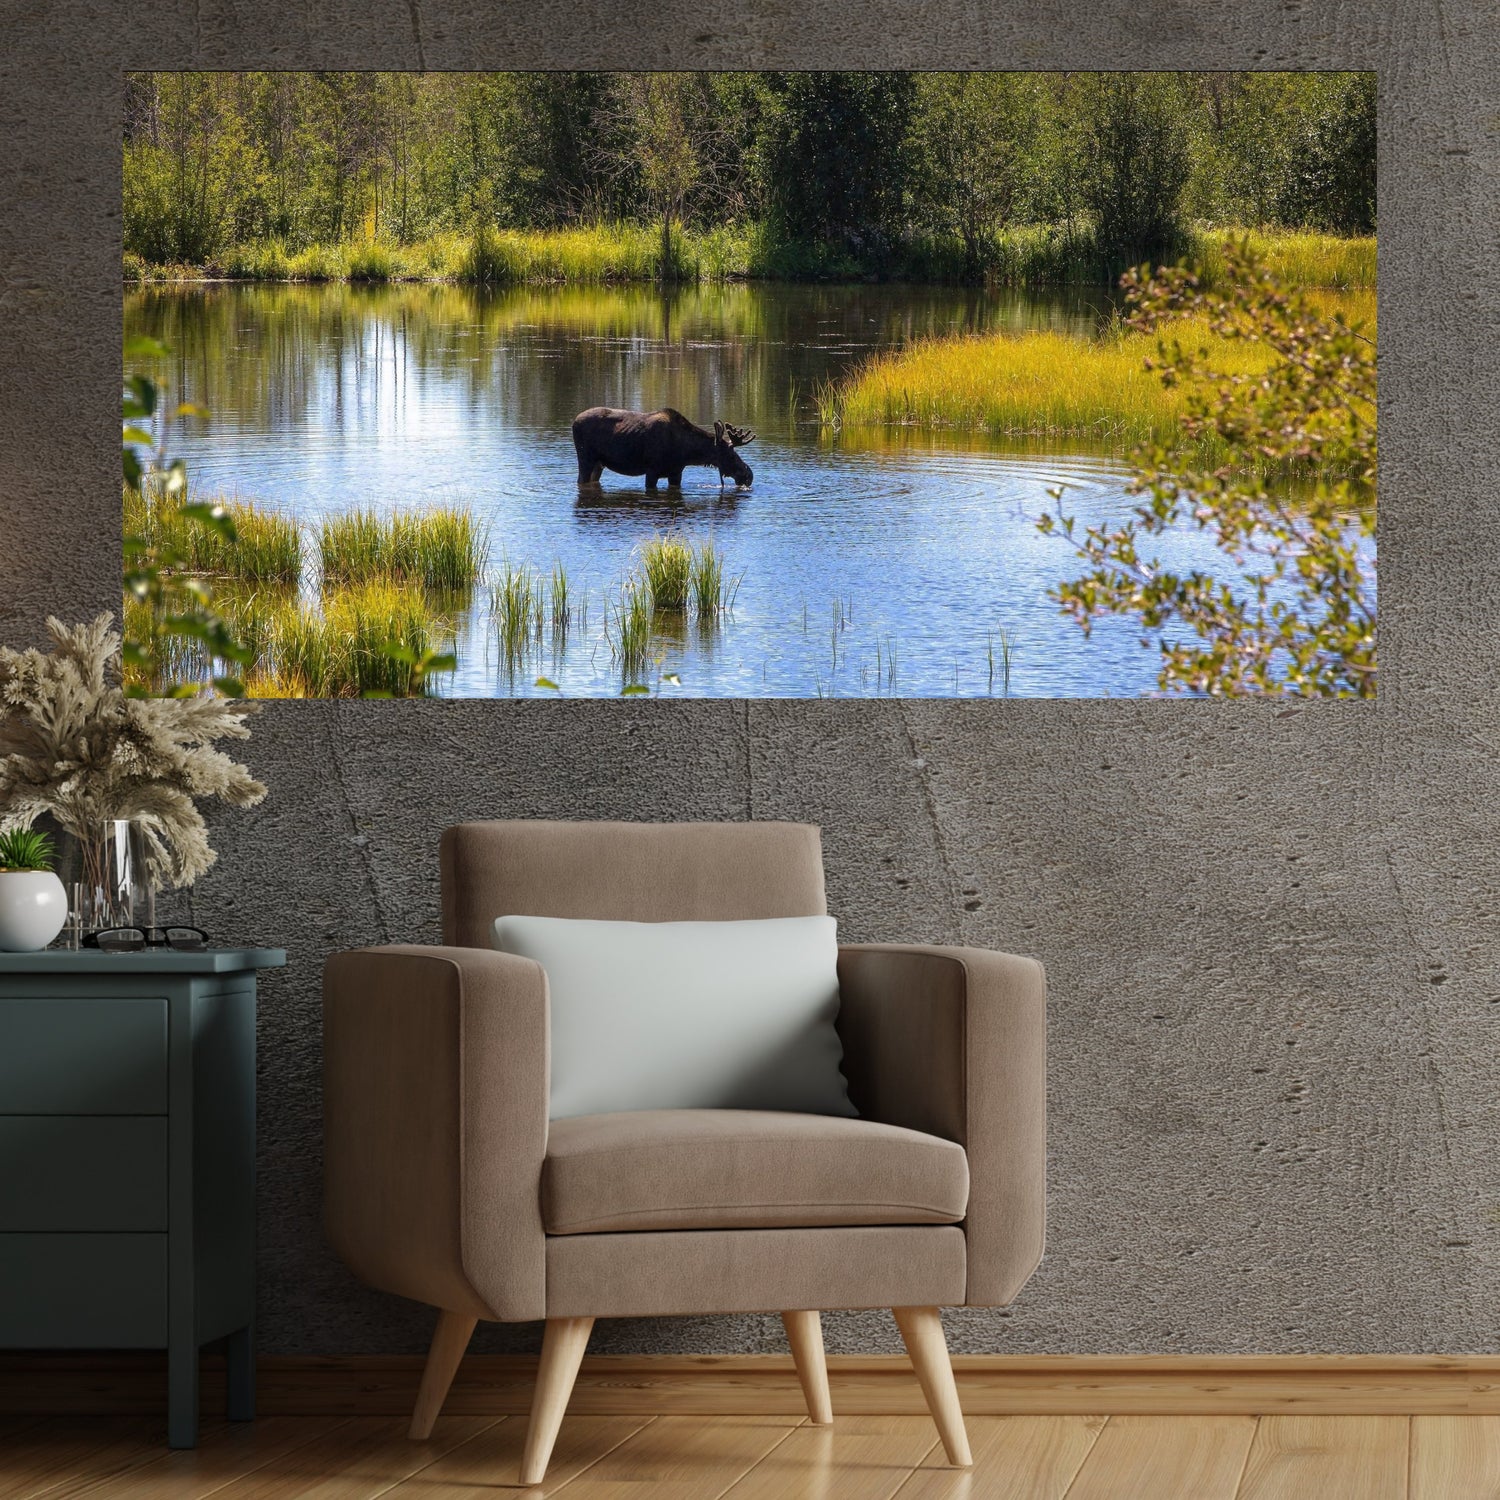 Large fine art of a moose drinking water in Wyoming from a marsh.  Art hanging on wall in a sitting area.